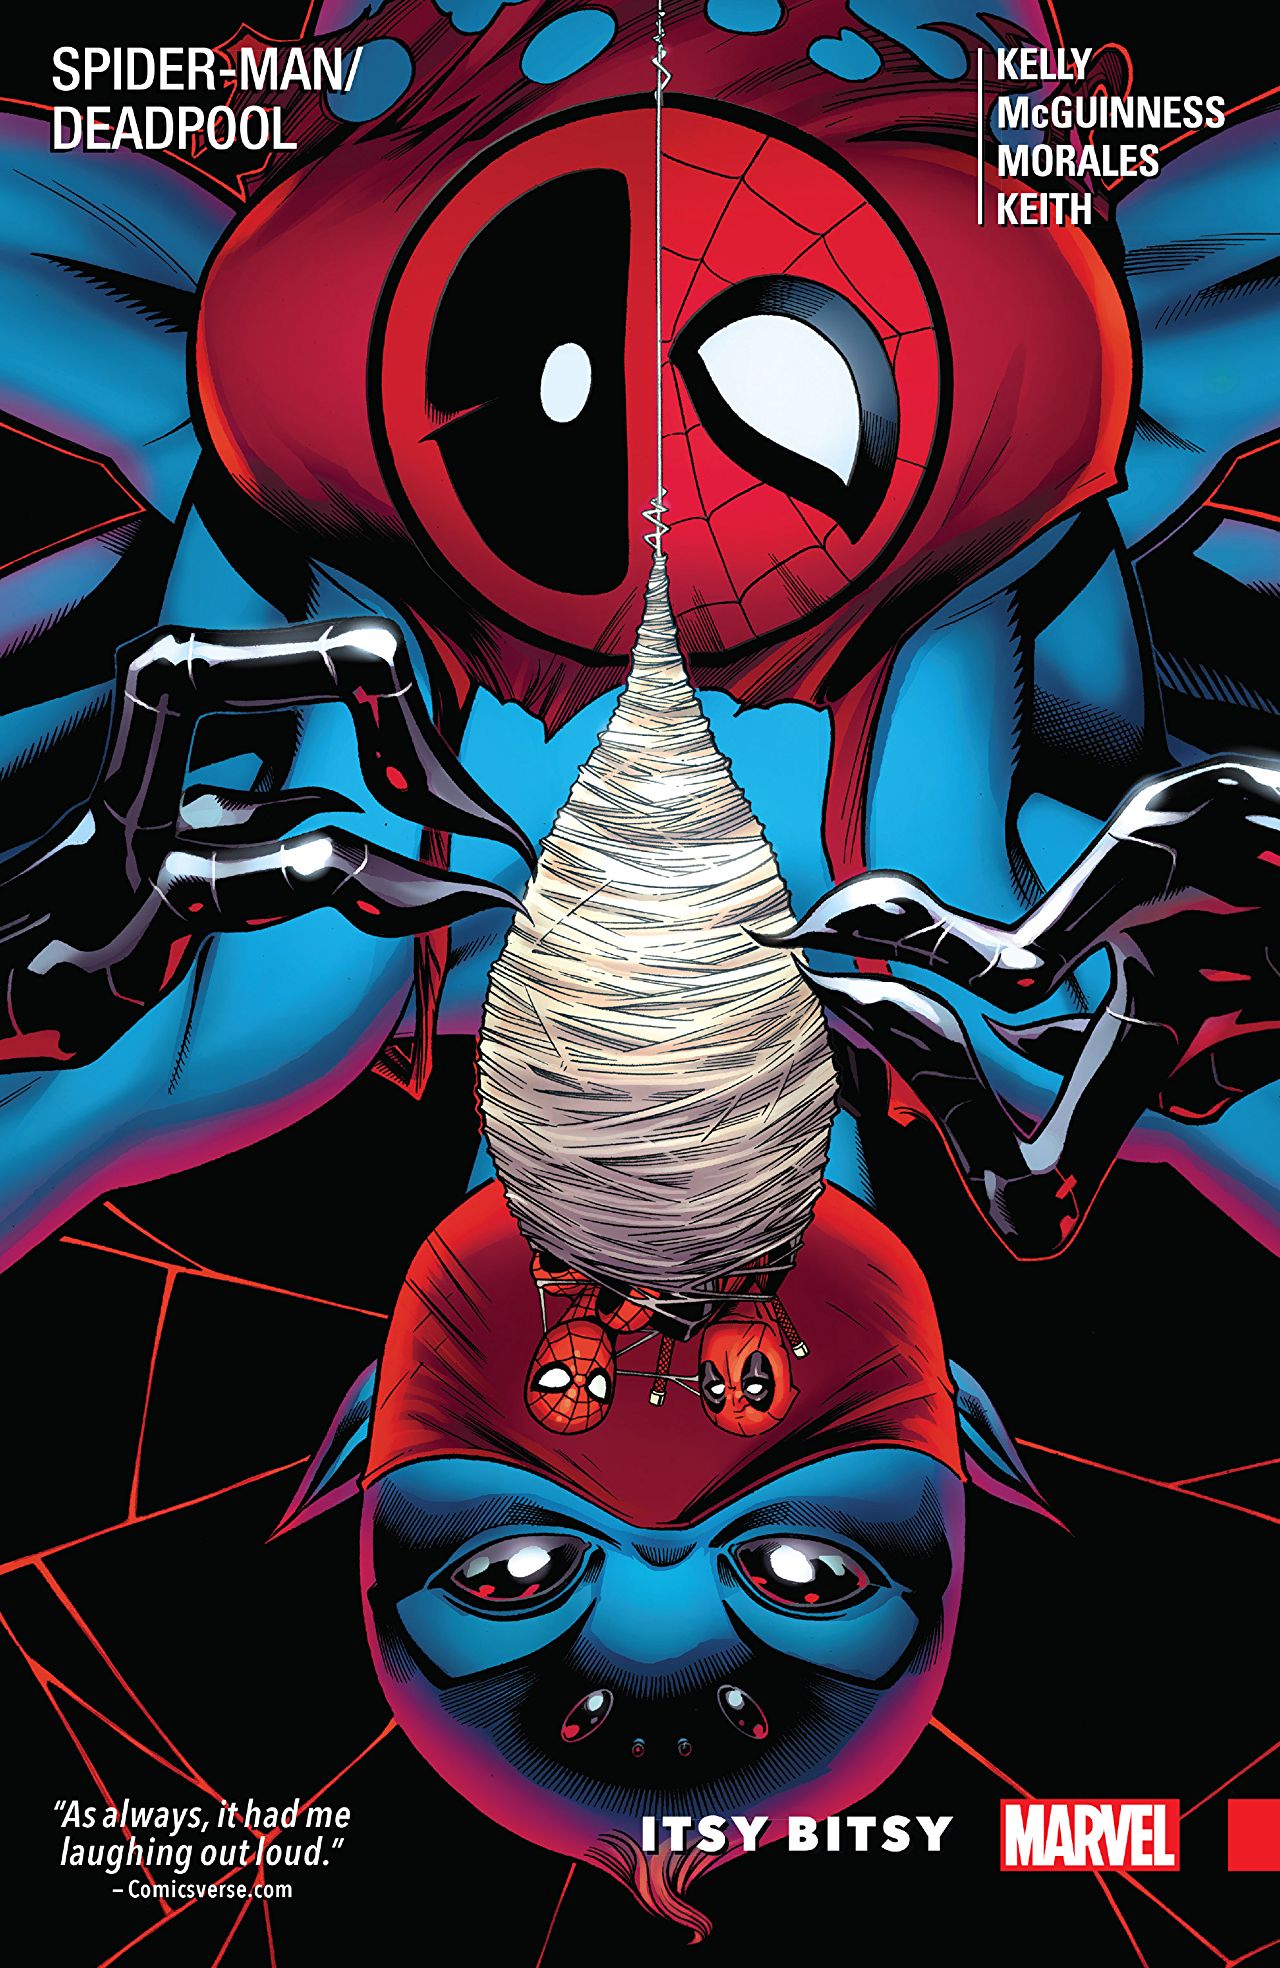 Spider-Man/Deadpool Vol. 3: Itsy Bitsy review: Quips, thwips and chips